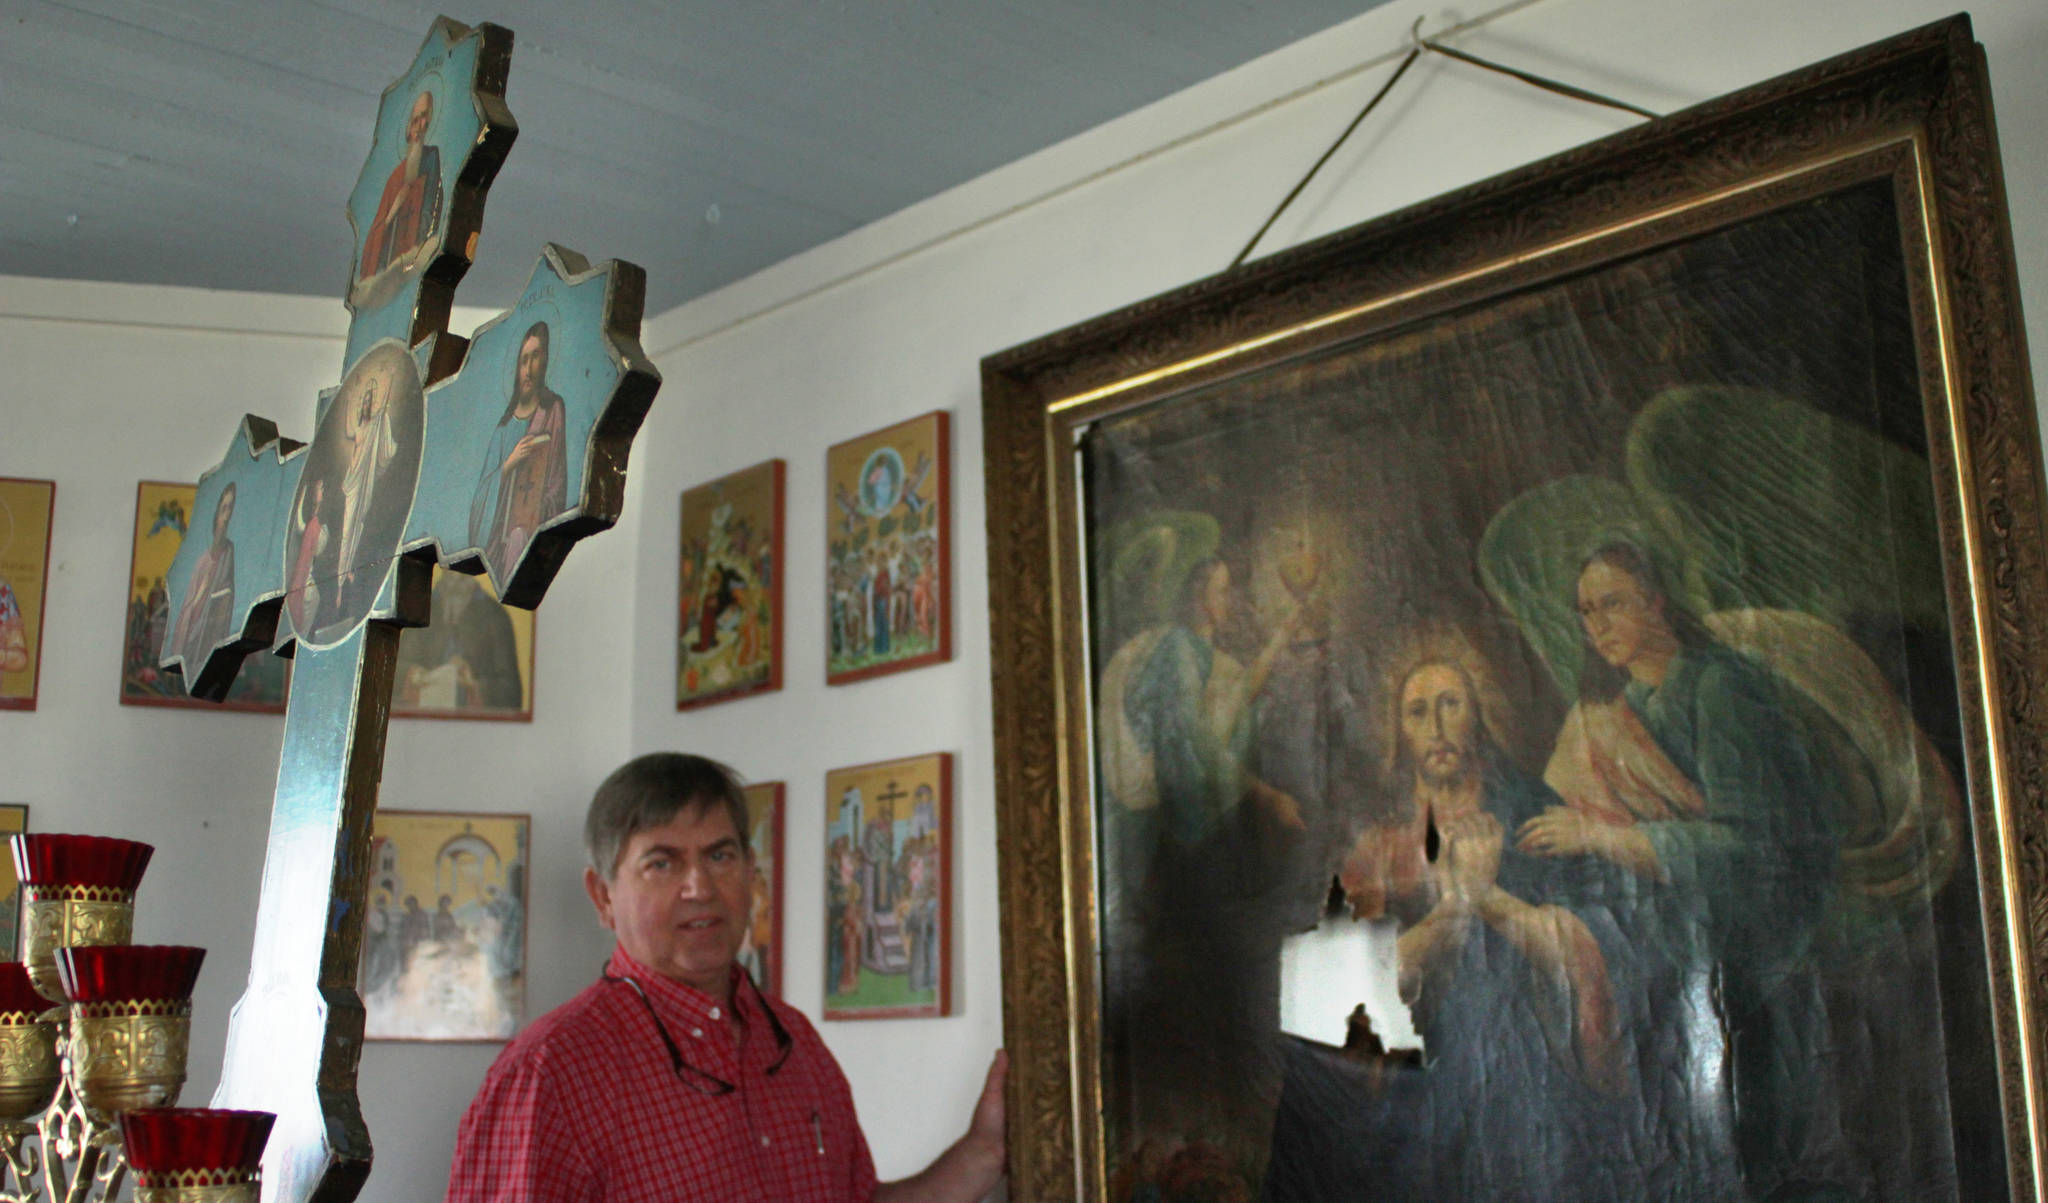 John Michael, a member of Kenai’s Holy Assumption of the Virgin Mary Russian Orthodox Church, prepares to carry a damaged icon of Jesus praying in the Garden of Gethsemane from the church’s sanctuary on Monday, May 15 in Kenai. In the foreground stands the wooden cross that fell backward during the January 2016 Iniskin Earthquake, tearing the icon’s canvas. After planning and fundraising for the icon’s repair since mid-2016, the church shipped it to an art restorer on Monday.